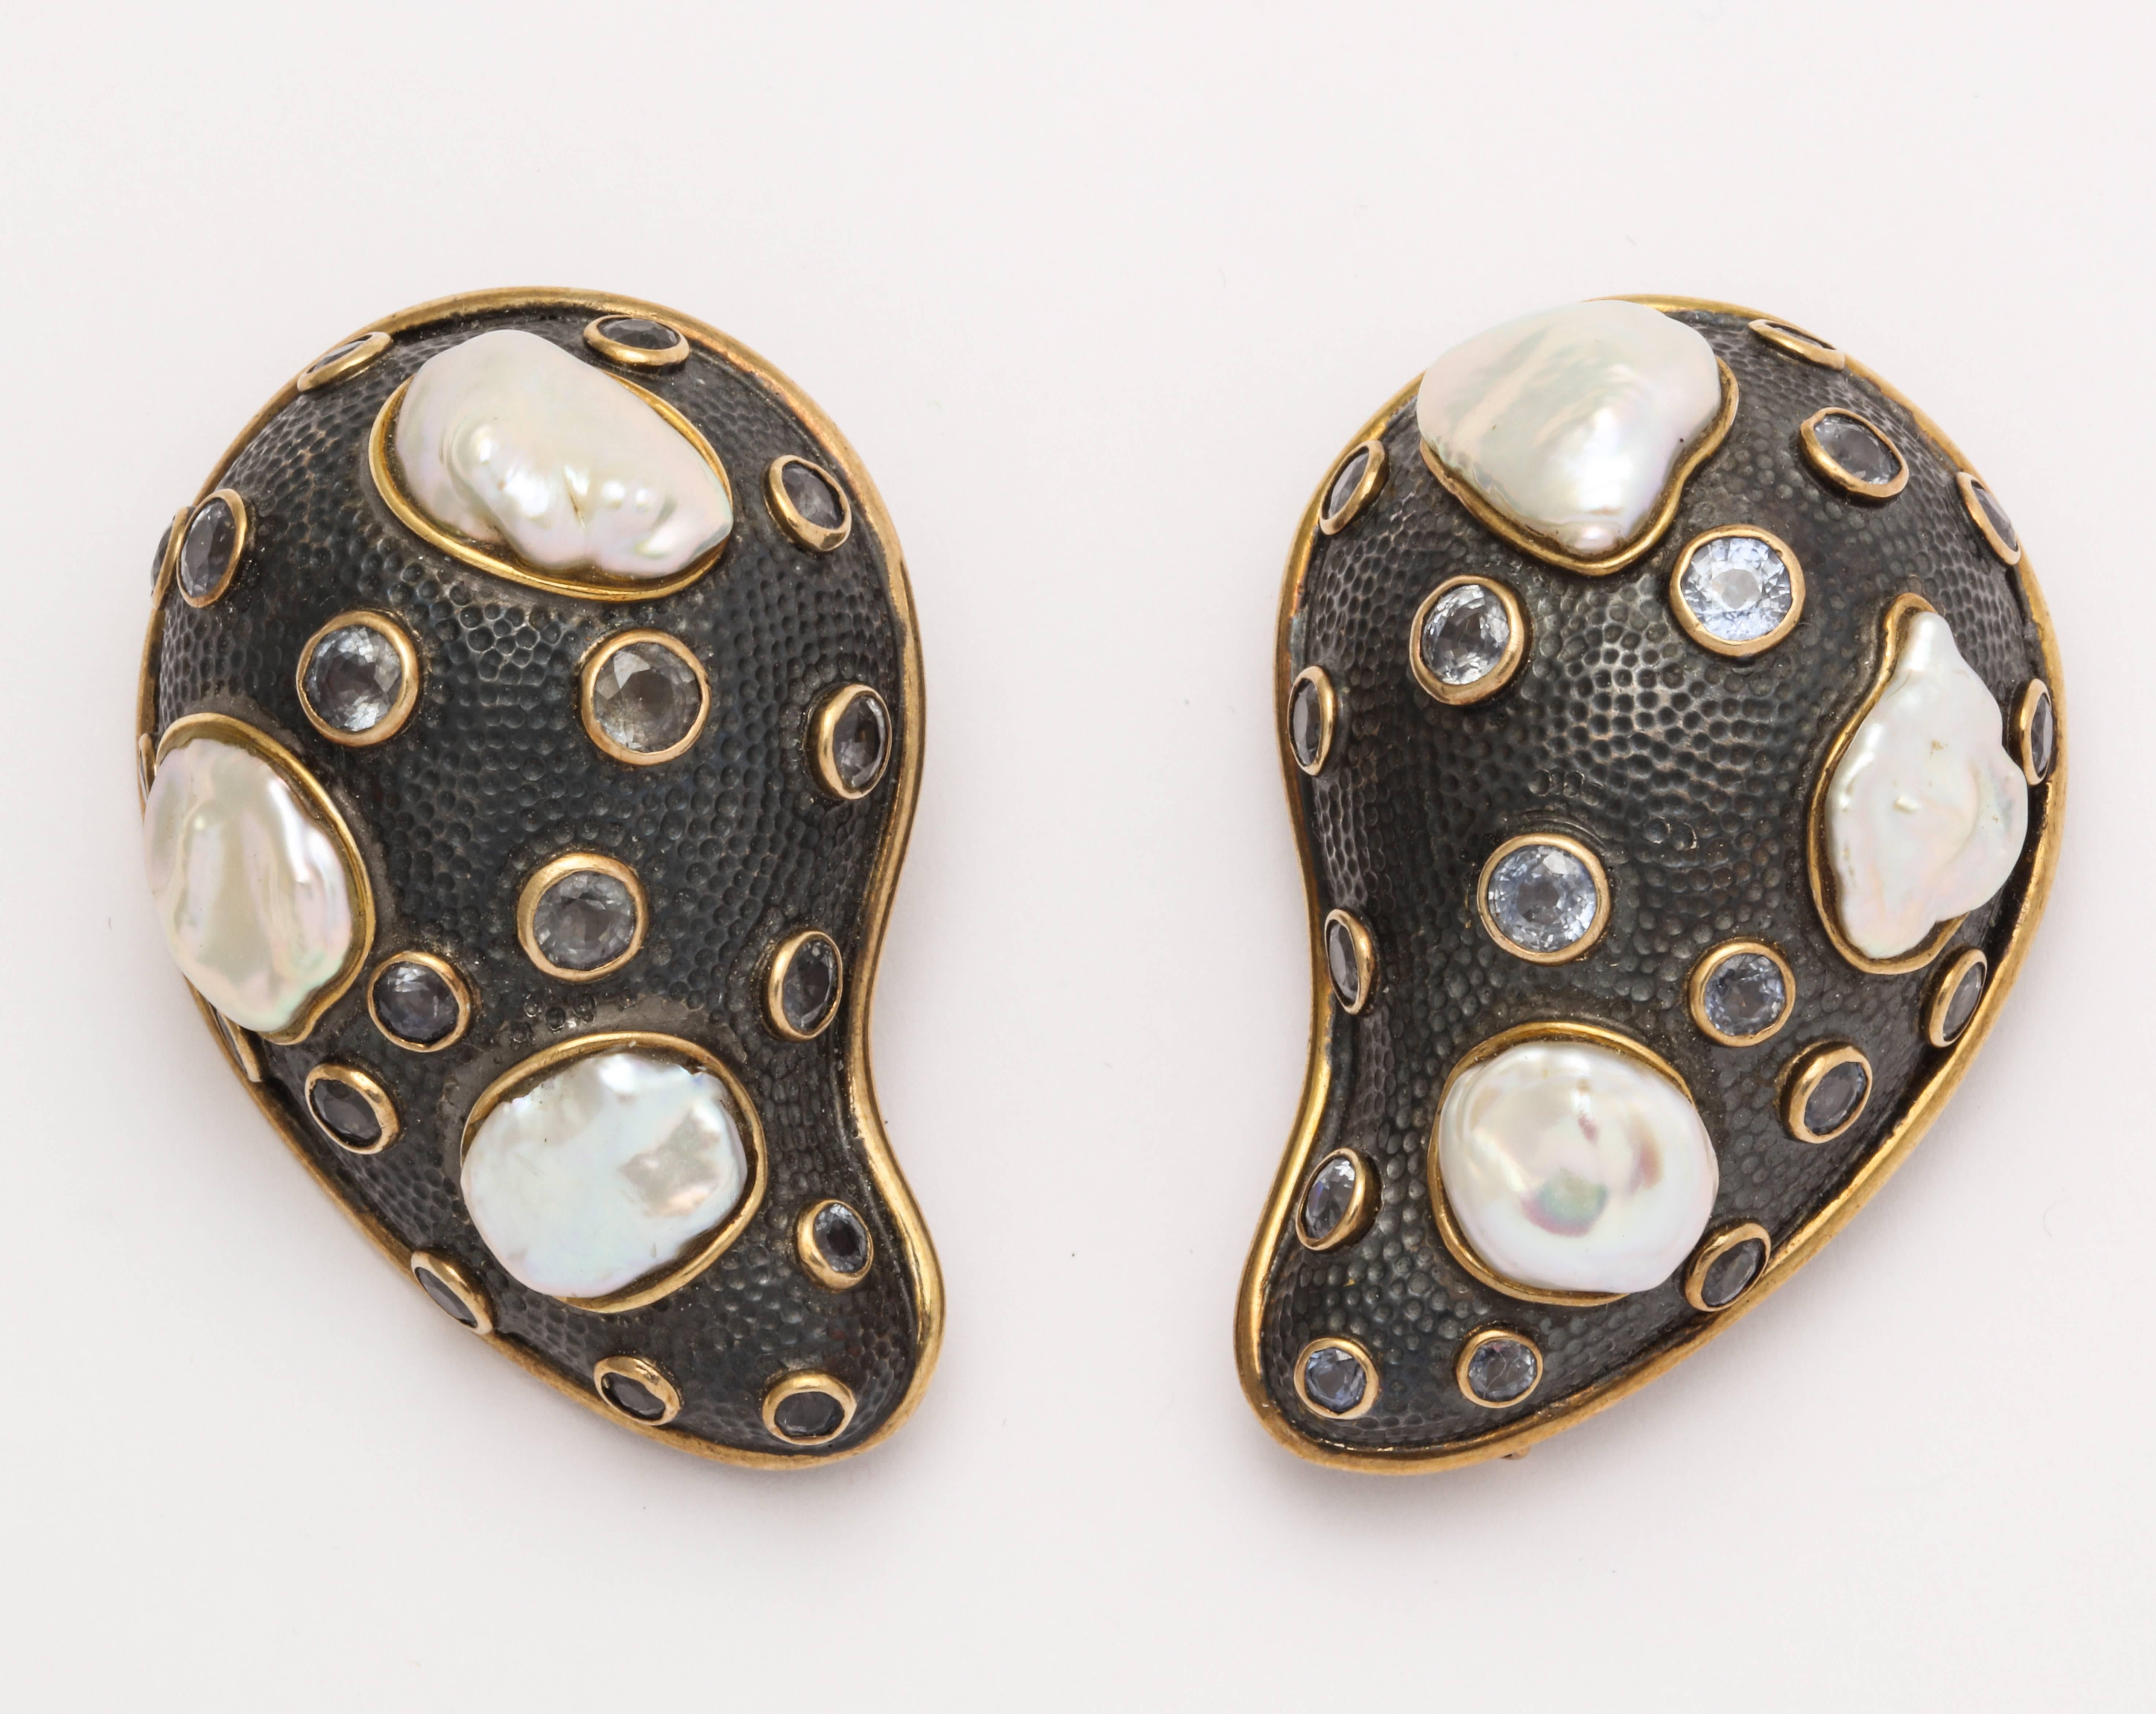 One of a kind and always exceptionally creative, Marilyn Cooperman's designs never fail to impress.  This wonderful pair of pins is very carefully designed on numerous levels.  The combination of the dark patinated silver, with a hand hammered